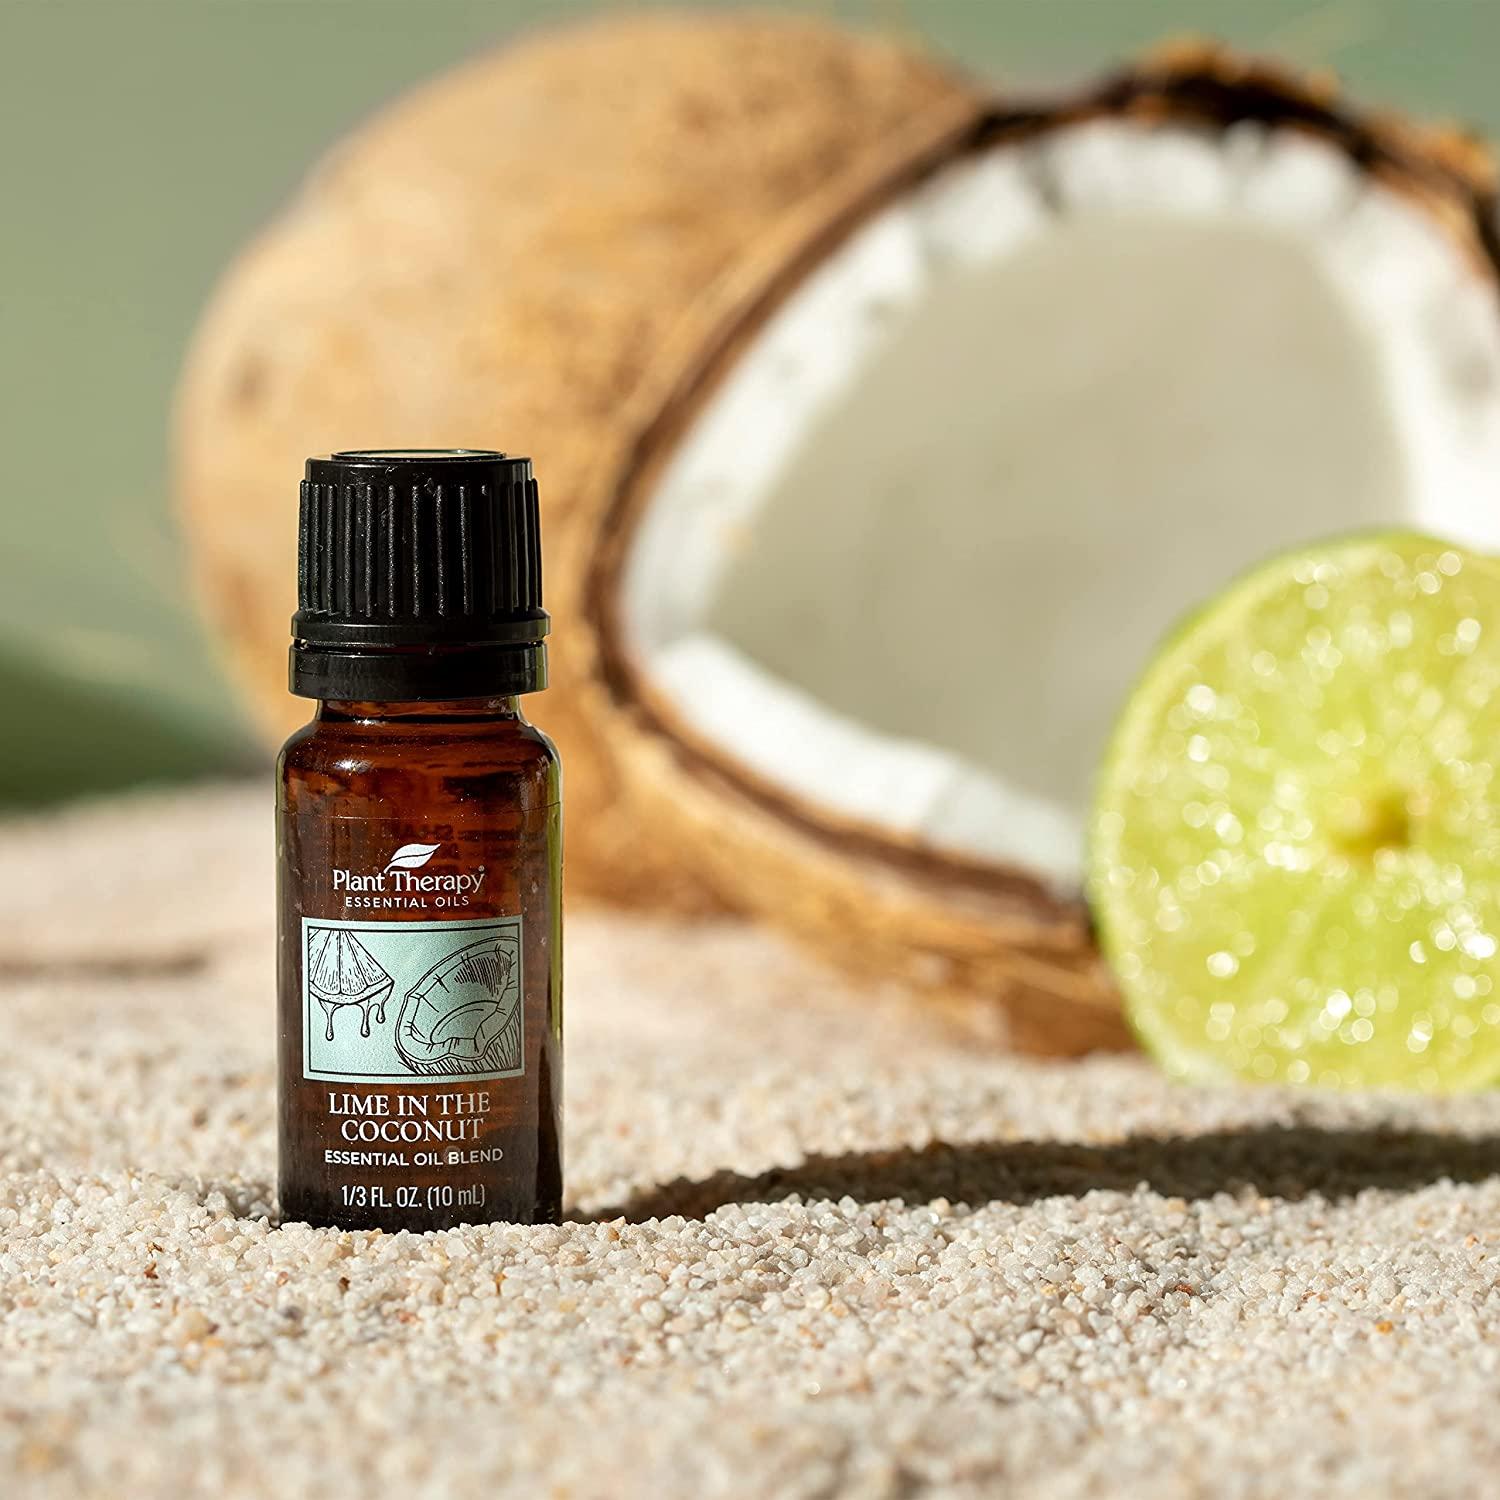 Plant Therapy Lime in The Coconut Essential Oil Blend 10 mL (1/3 oz) for  Aromatic Diffusion for Your Home, car or Office, 100% Pure, Undiluted,  Therapeutic Grade